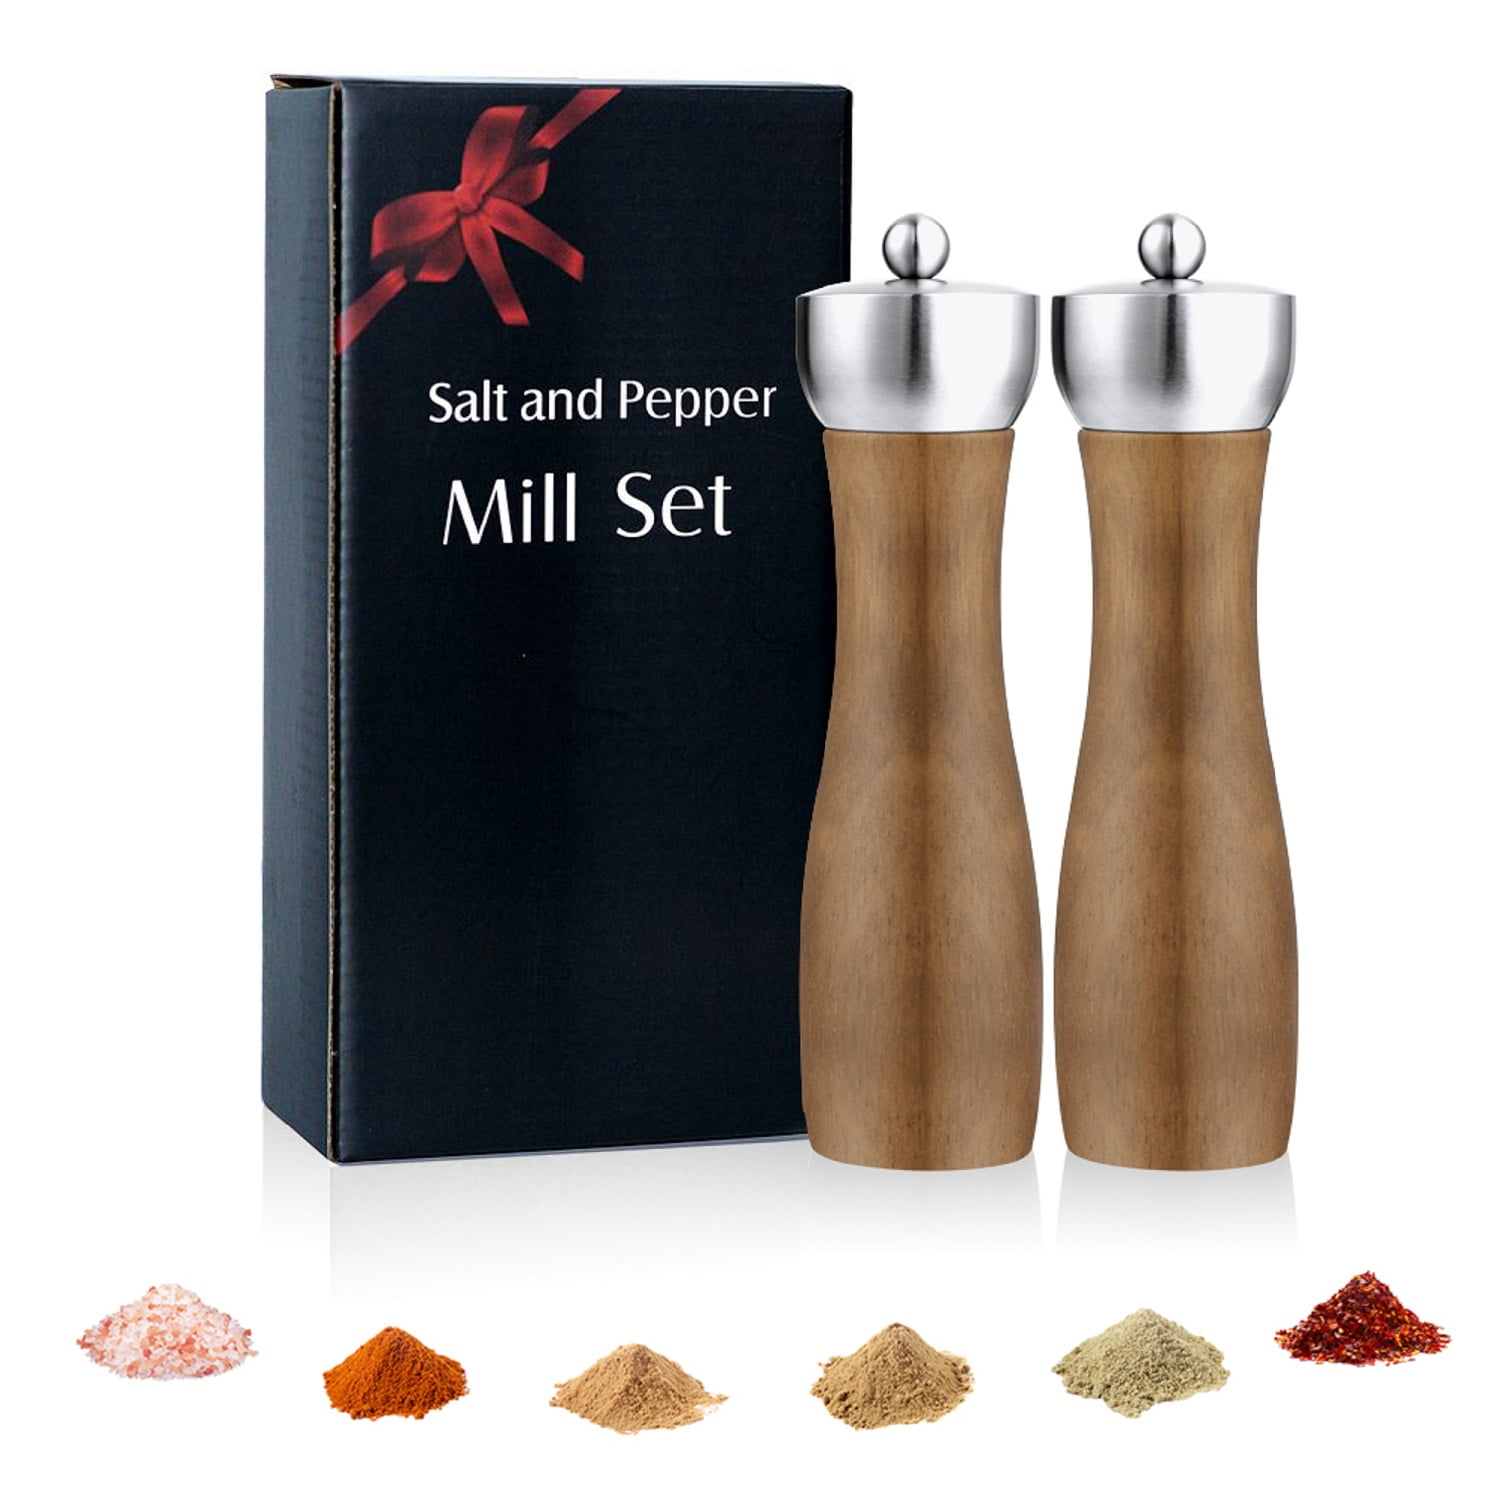 Salt and Pepper Grinder Set - Stainless Steel Pepper Grinder and Salt Grinder with Tray in Luxurious Gift-Box - Manual Mills with Ceramic Grinders